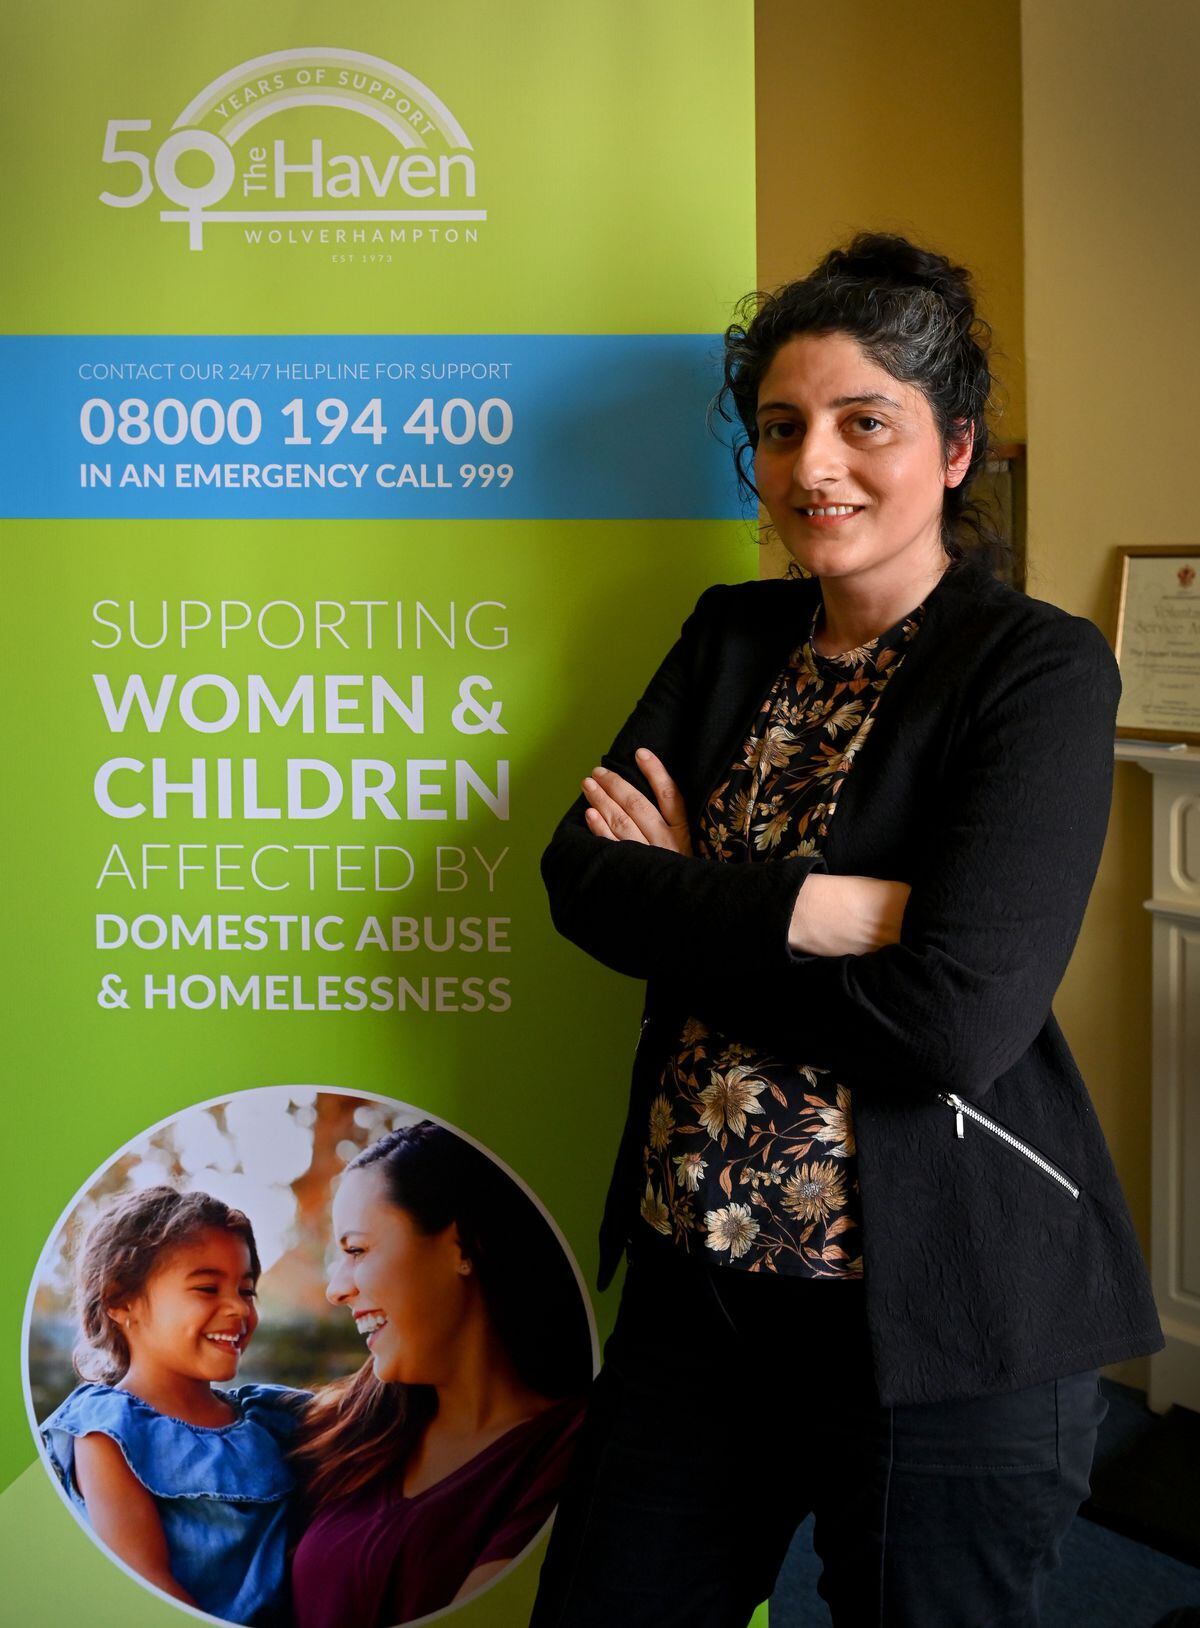 Popinder has been part of the charity since 2004 and said the services were always evolving 